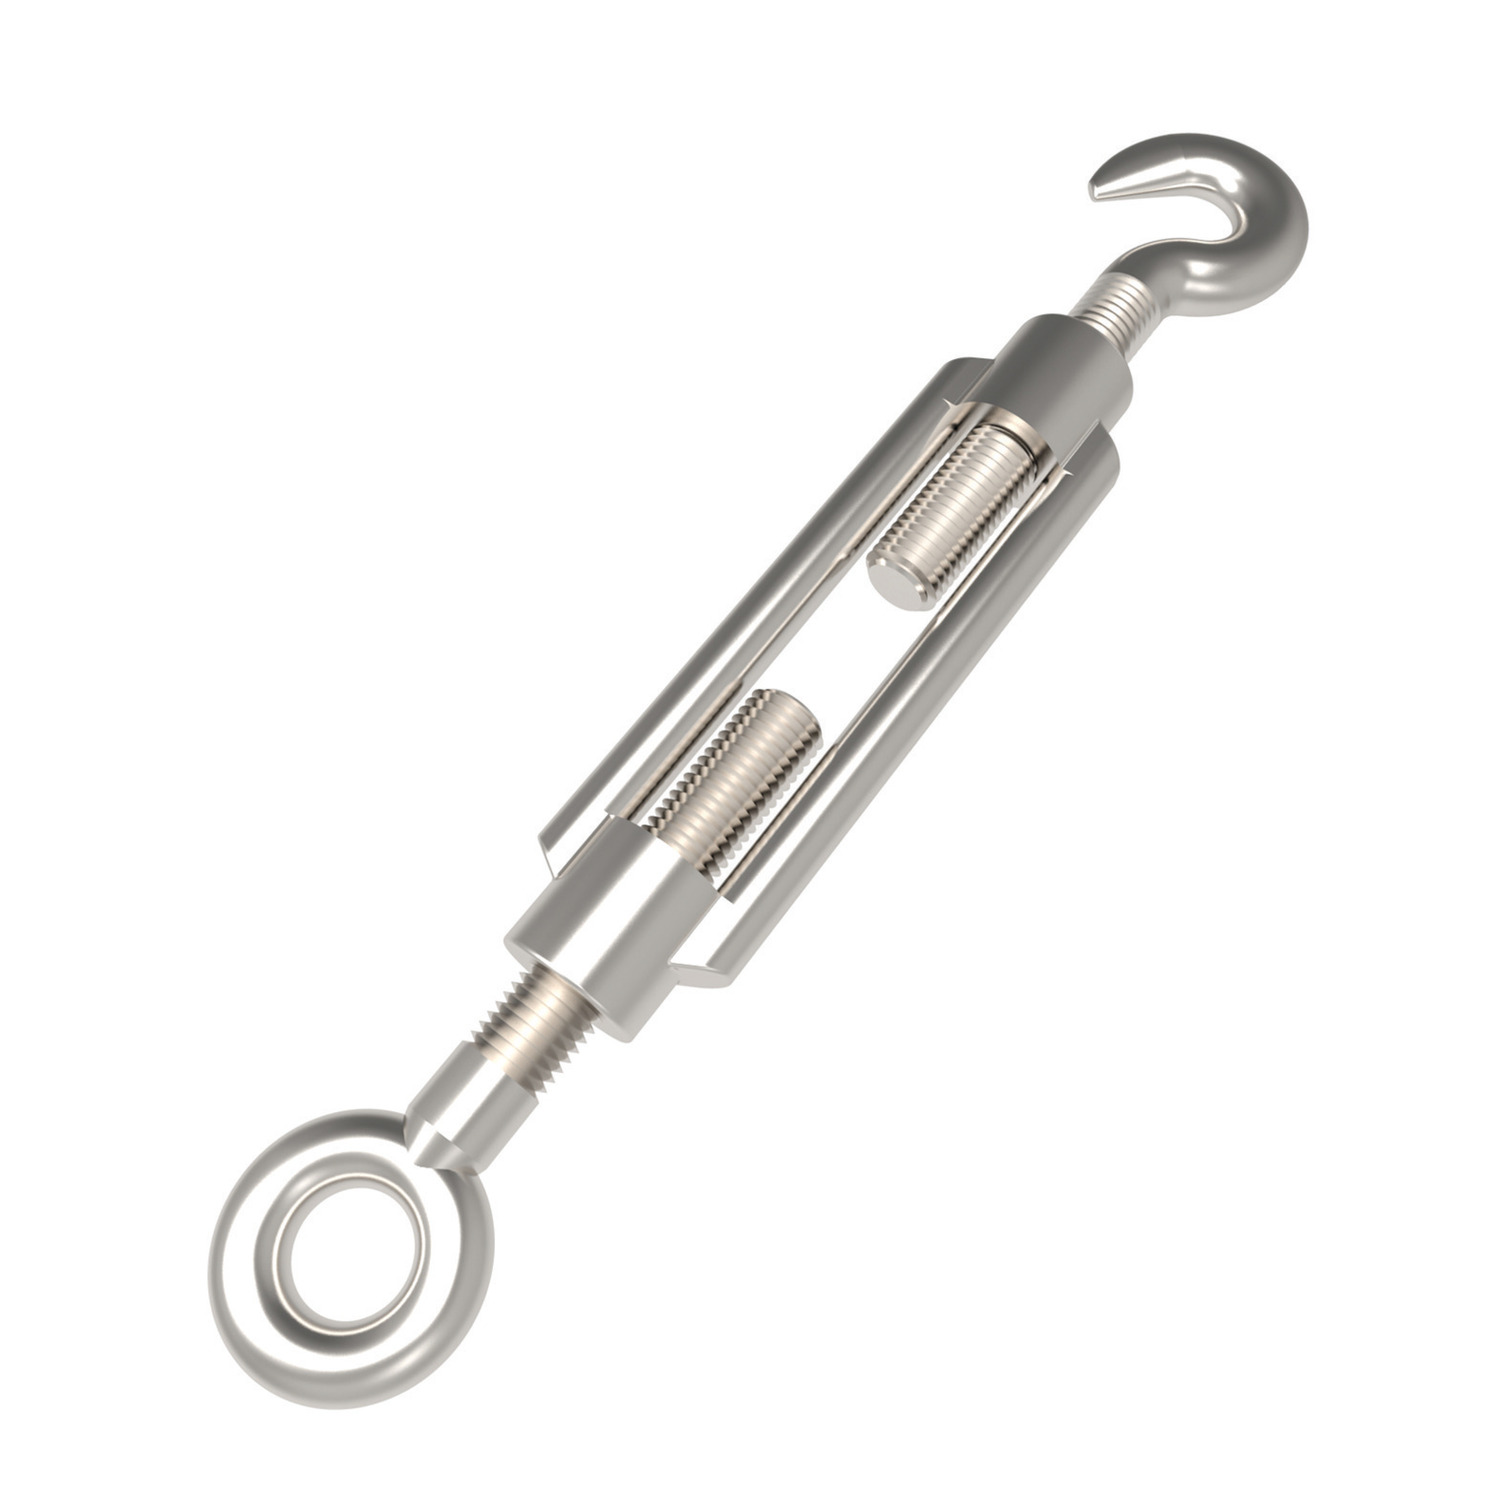 R3852.008-A4 Hook & Eye Turnbuckles M8 A4 s/s Not to be used for lifting unless SWL marked.